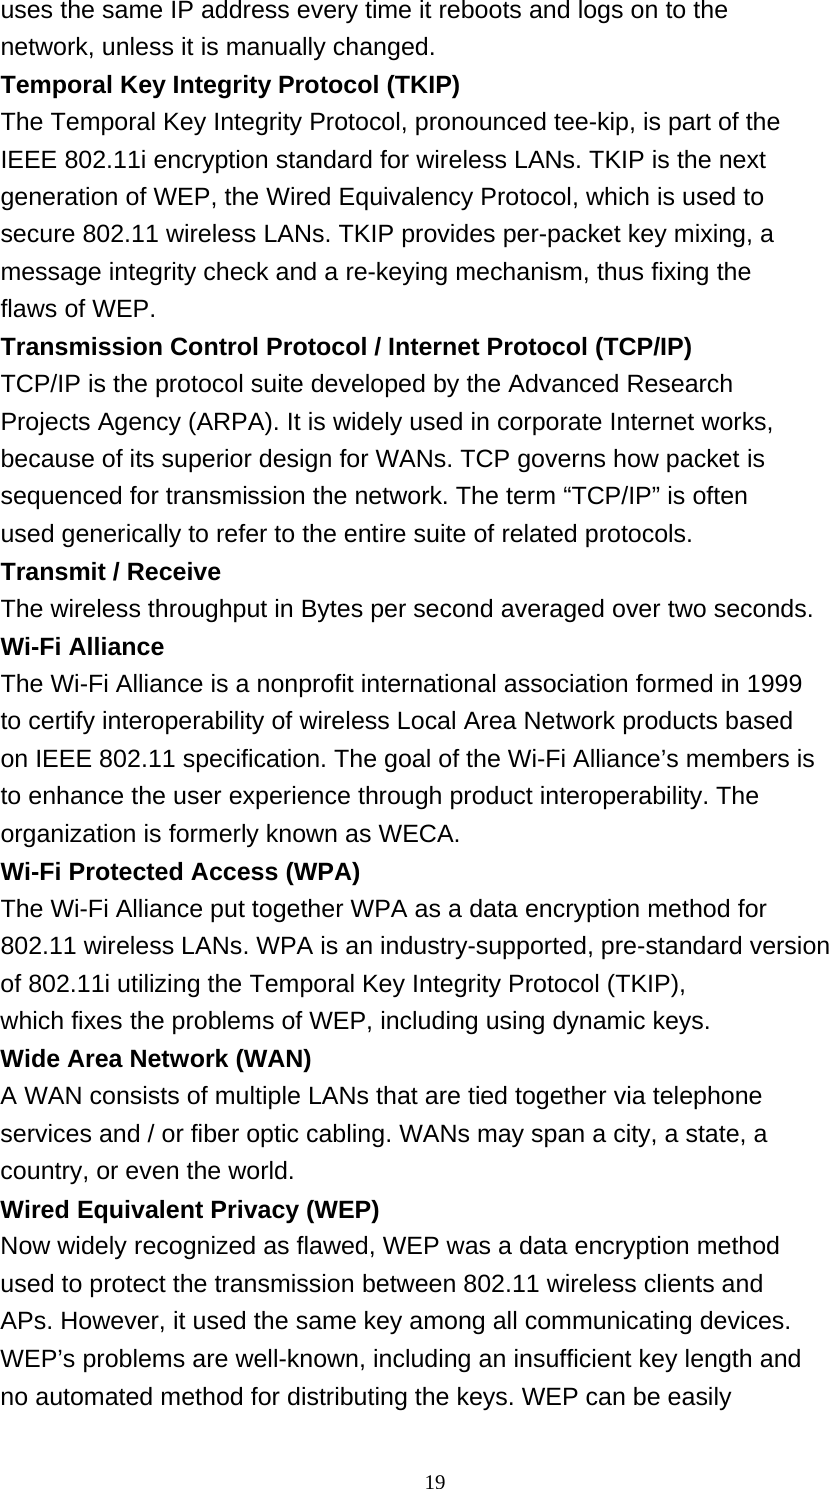 19  uses the same IP address every time it reboots and logs on to the network, unless it is manually changed. Temporal Key Integrity Protocol (TKIP) The Temporal Key Integrity Protocol, pronounced tee-kip, is part of the IEEE 802.11i encryption standard for wireless LANs. TKIP is the next generation of WEP, the Wired Equivalency Protocol, which is used to secure 802.11 wireless LANs. TKIP provides per-packet key mixing, a message integrity check and a re-keying mechanism, thus fixing the flaws of WEP. Transmission Control Protocol / Internet Protocol (TCP/IP) TCP/IP is the protocol suite developed by the Advanced Research Projects Agency (ARPA). It is widely used in corporate Internet works, because of its superior design for WANs. TCP governs how packet is sequenced for transmission the network. The term “TCP/IP” is often used generically to refer to the entire suite of related protocols. Transmit / Receive The wireless throughput in Bytes per second averaged over two seconds. Wi-Fi Alliance The Wi-Fi Alliance is a nonprofit international association formed in 1999 to certify interoperability of wireless Local Area Network products based on IEEE 802.11 specification. The goal of the Wi-Fi Alliance’s members is to enhance the user experience through product interoperability. The organization is formerly known as WECA. Wi-Fi Protected Access (WPA) The Wi-Fi Alliance put together WPA as a data encryption method for 802.11 wireless LANs. WPA is an industry-supported, pre-standard version of 802.11i utilizing the Temporal Key Integrity Protocol (TKIP), which fixes the problems of WEP, including using dynamic keys. Wide Area Network (WAN) A WAN consists of multiple LANs that are tied together via telephone services and / or fiber optic cabling. WANs may span a city, a state, a country, or even the world. Wired Equivalent Privacy (WEP) Now widely recognized as flawed, WEP was a data encryption method used to protect the transmission between 802.11 wireless clients and APs. However, it used the same key among all communicating devices. WEP’s problems are well-known, including an insufficient key length and no automated method for distributing the keys. WEP can be easily 